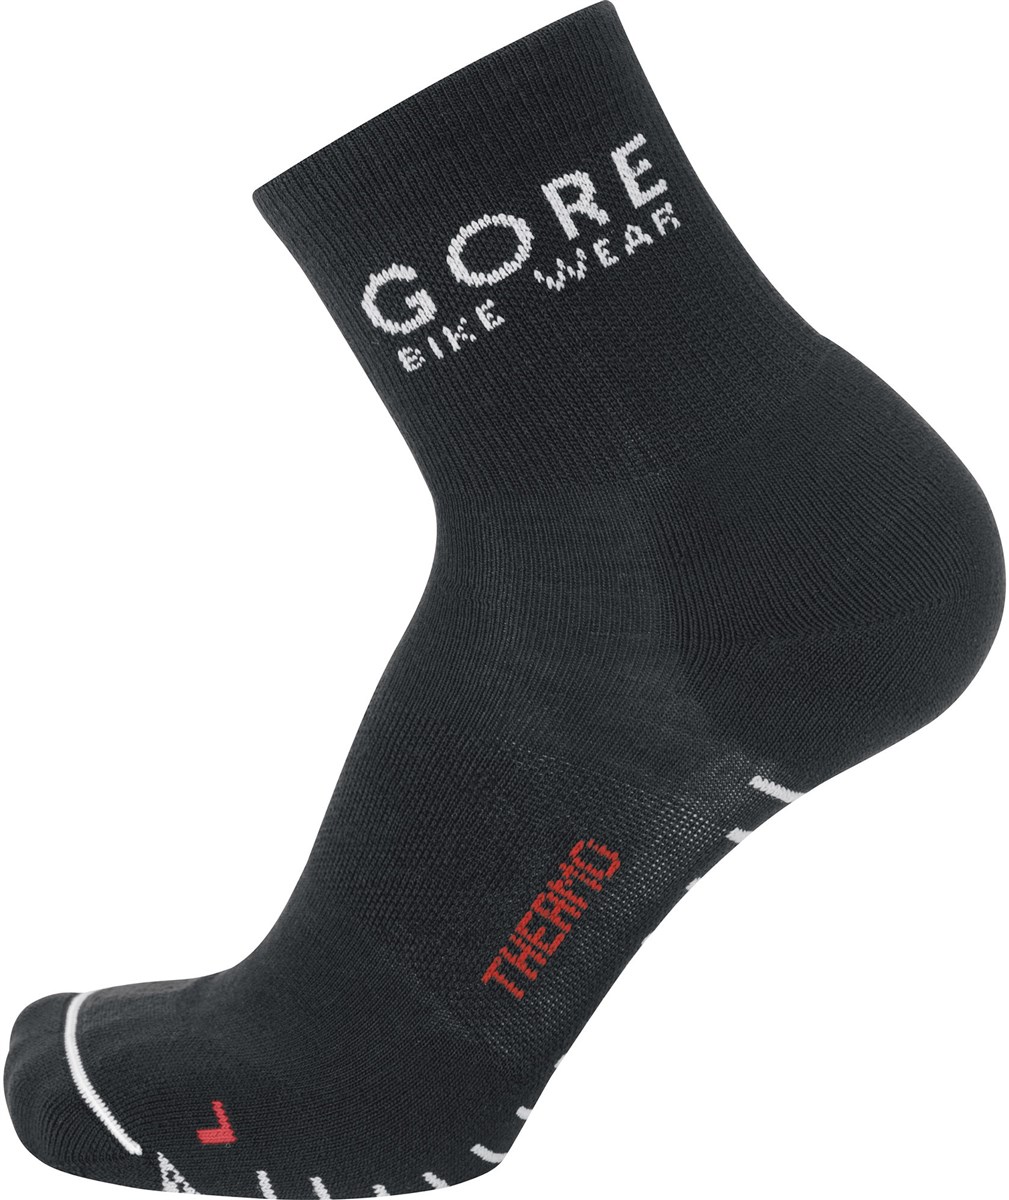 Gore Road Thermo Socks Mid AW17 product image